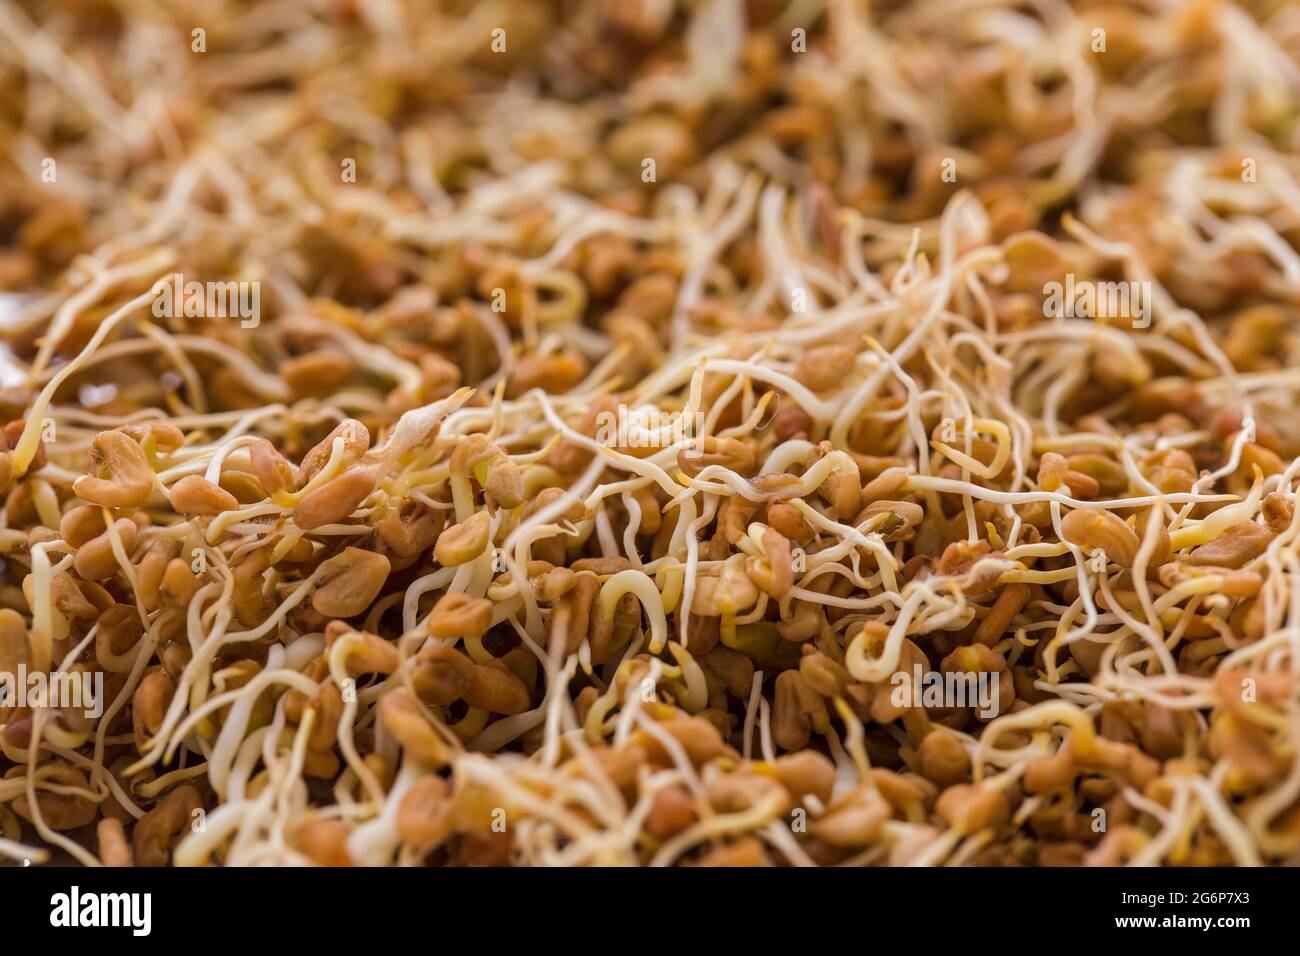 Close up of Sprouted Fenugreek (Methi) Seeds. Trigonella foenum-graecum, also used a traditional medicine has immense health benefits. Stock Photo